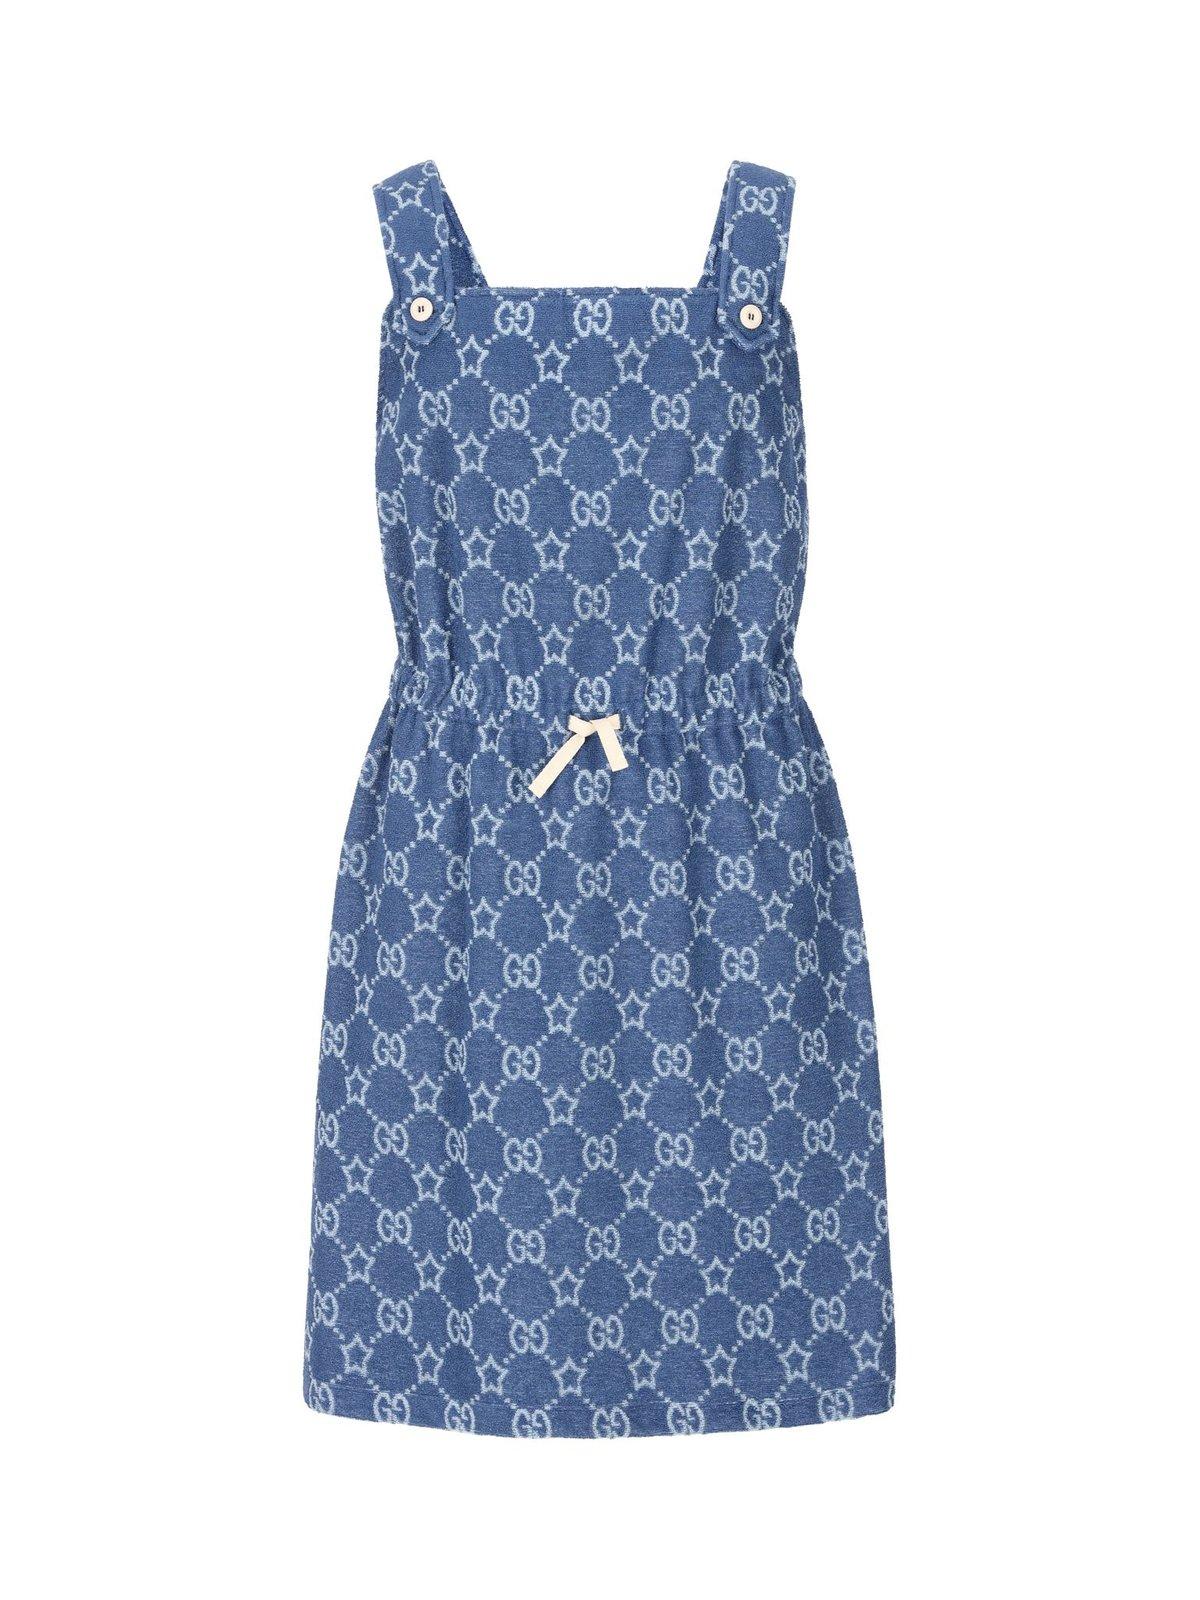 GUCCI ALL-OVER LOGO PATTERNED SLEEVELESS DRESSES